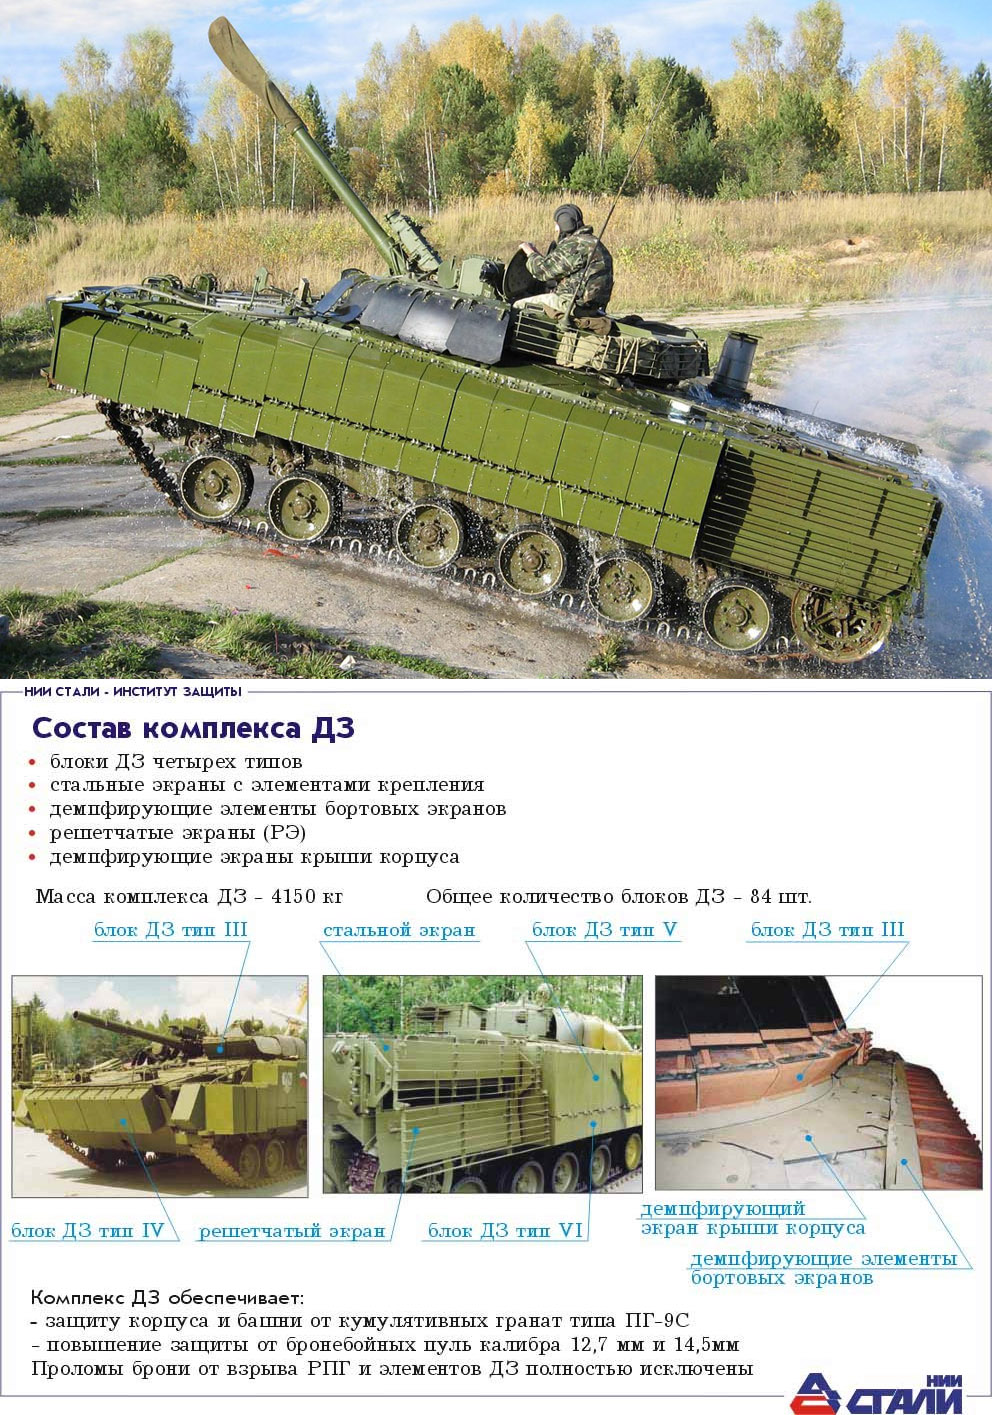 russians Demonstrate BMP-3 with Reactive Armour for the First Time, Defense Express